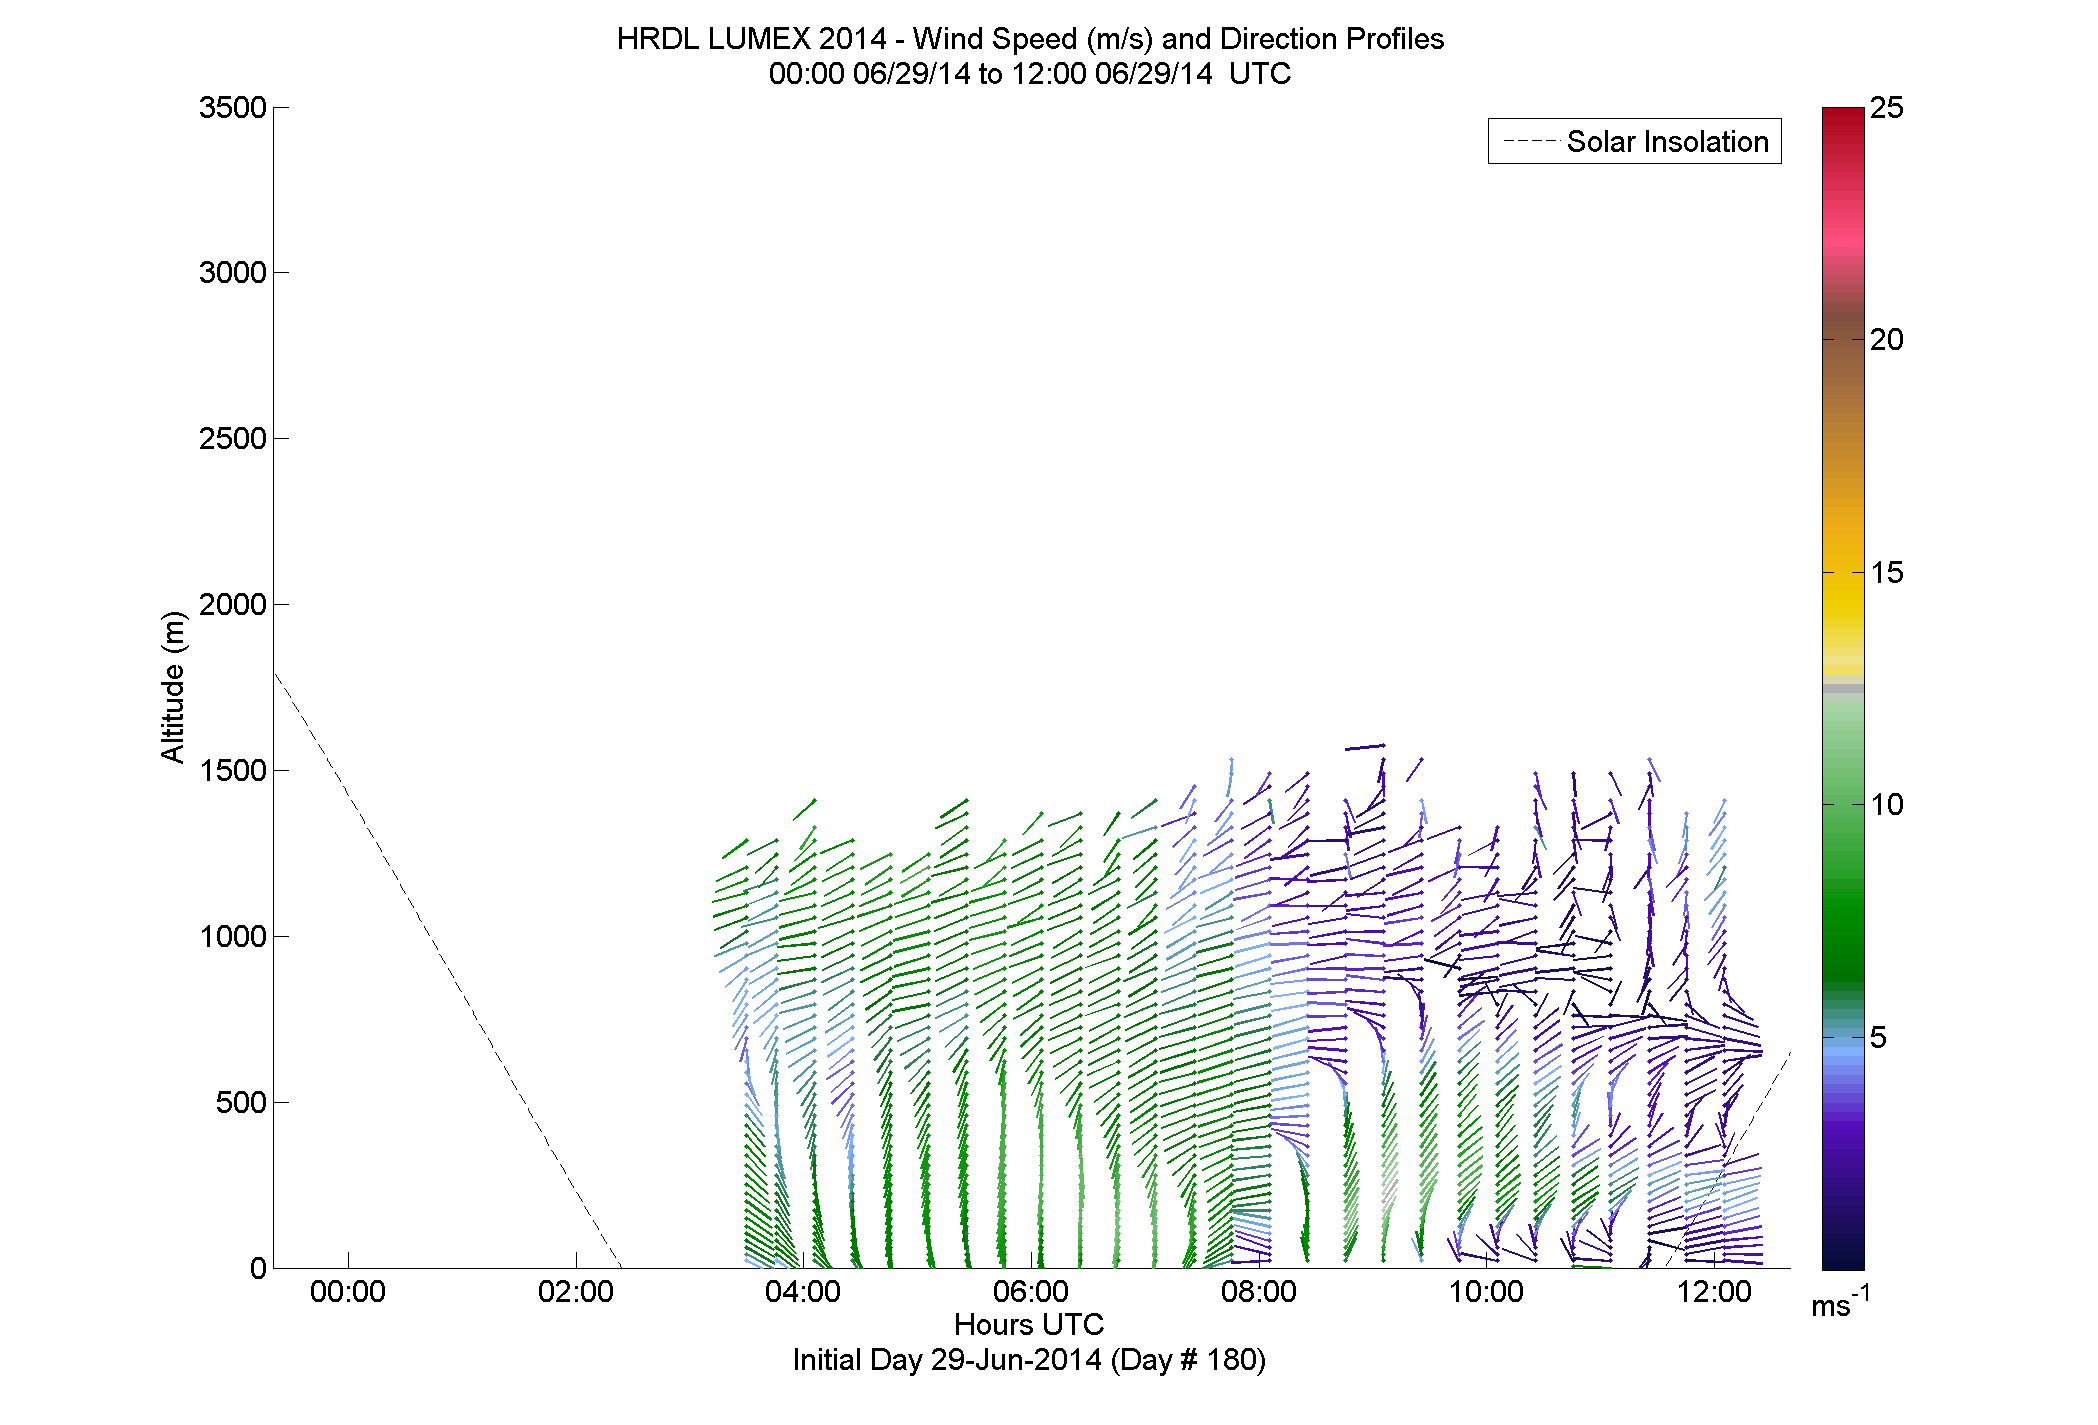 HRDL speed and direction profile - June 29 am